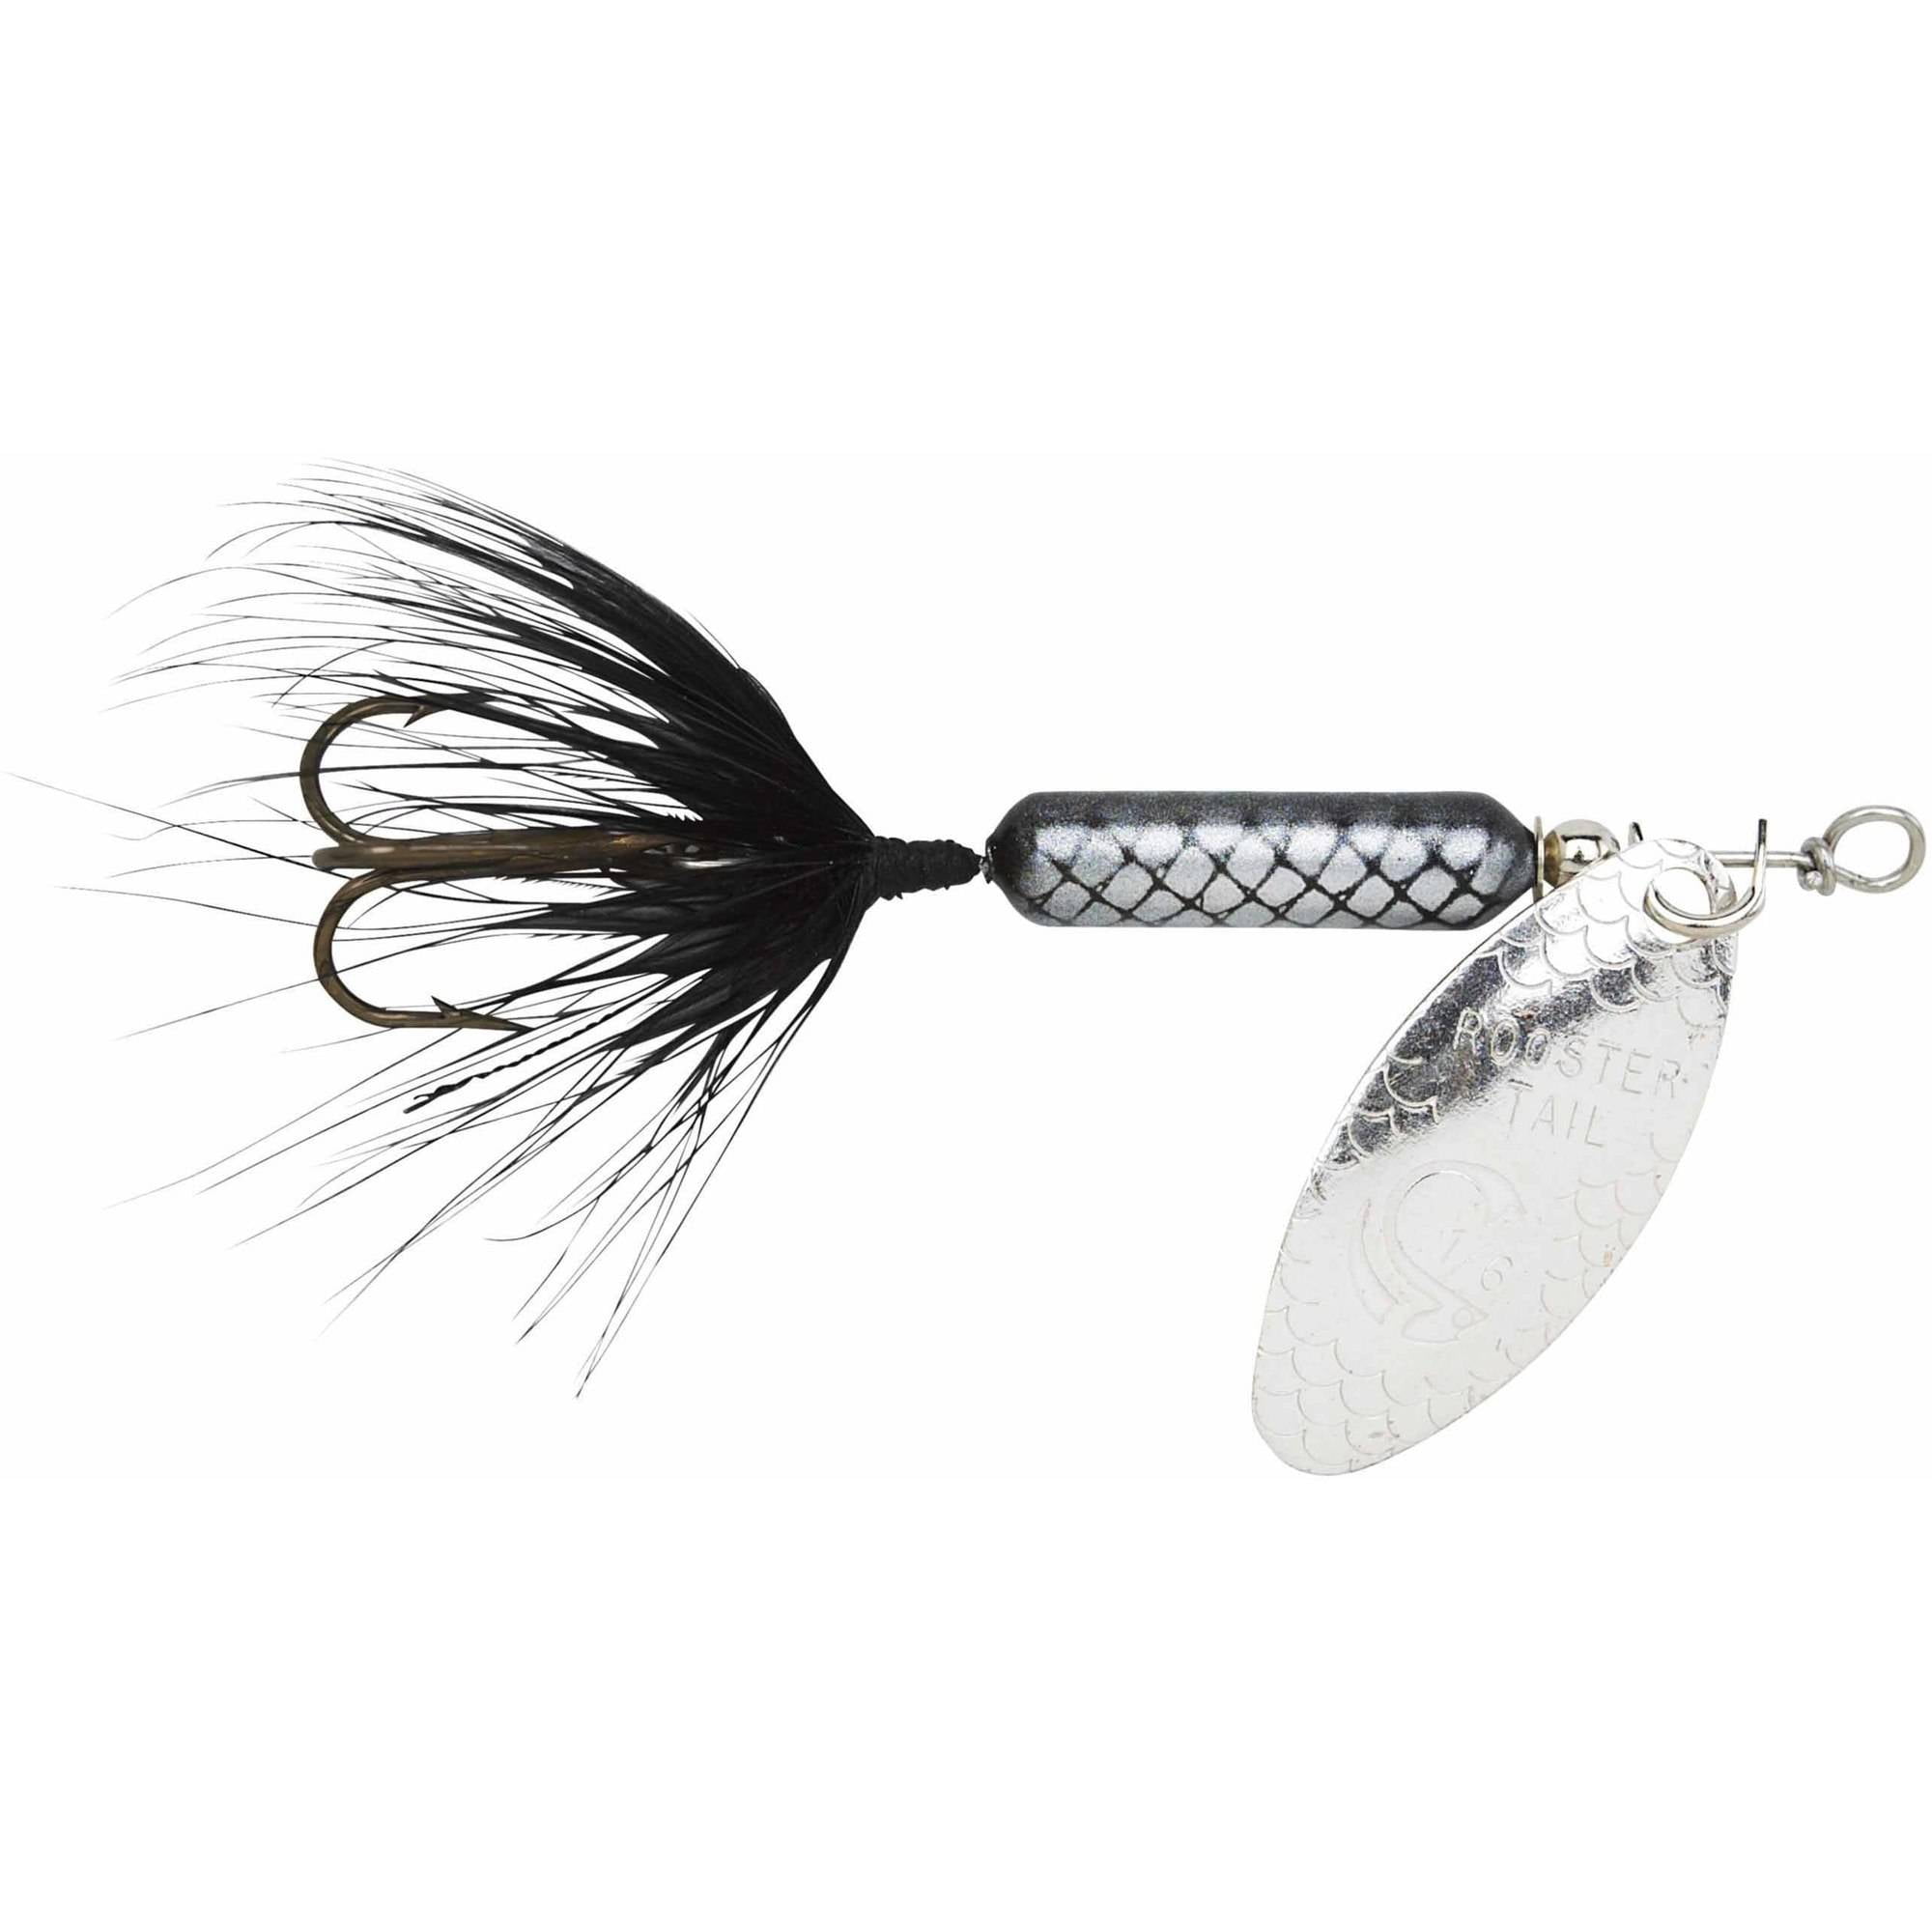 Yakima Bait Original Rooster Tail, Inline Spinnerbait Fishing Lure, 1/8 oz  